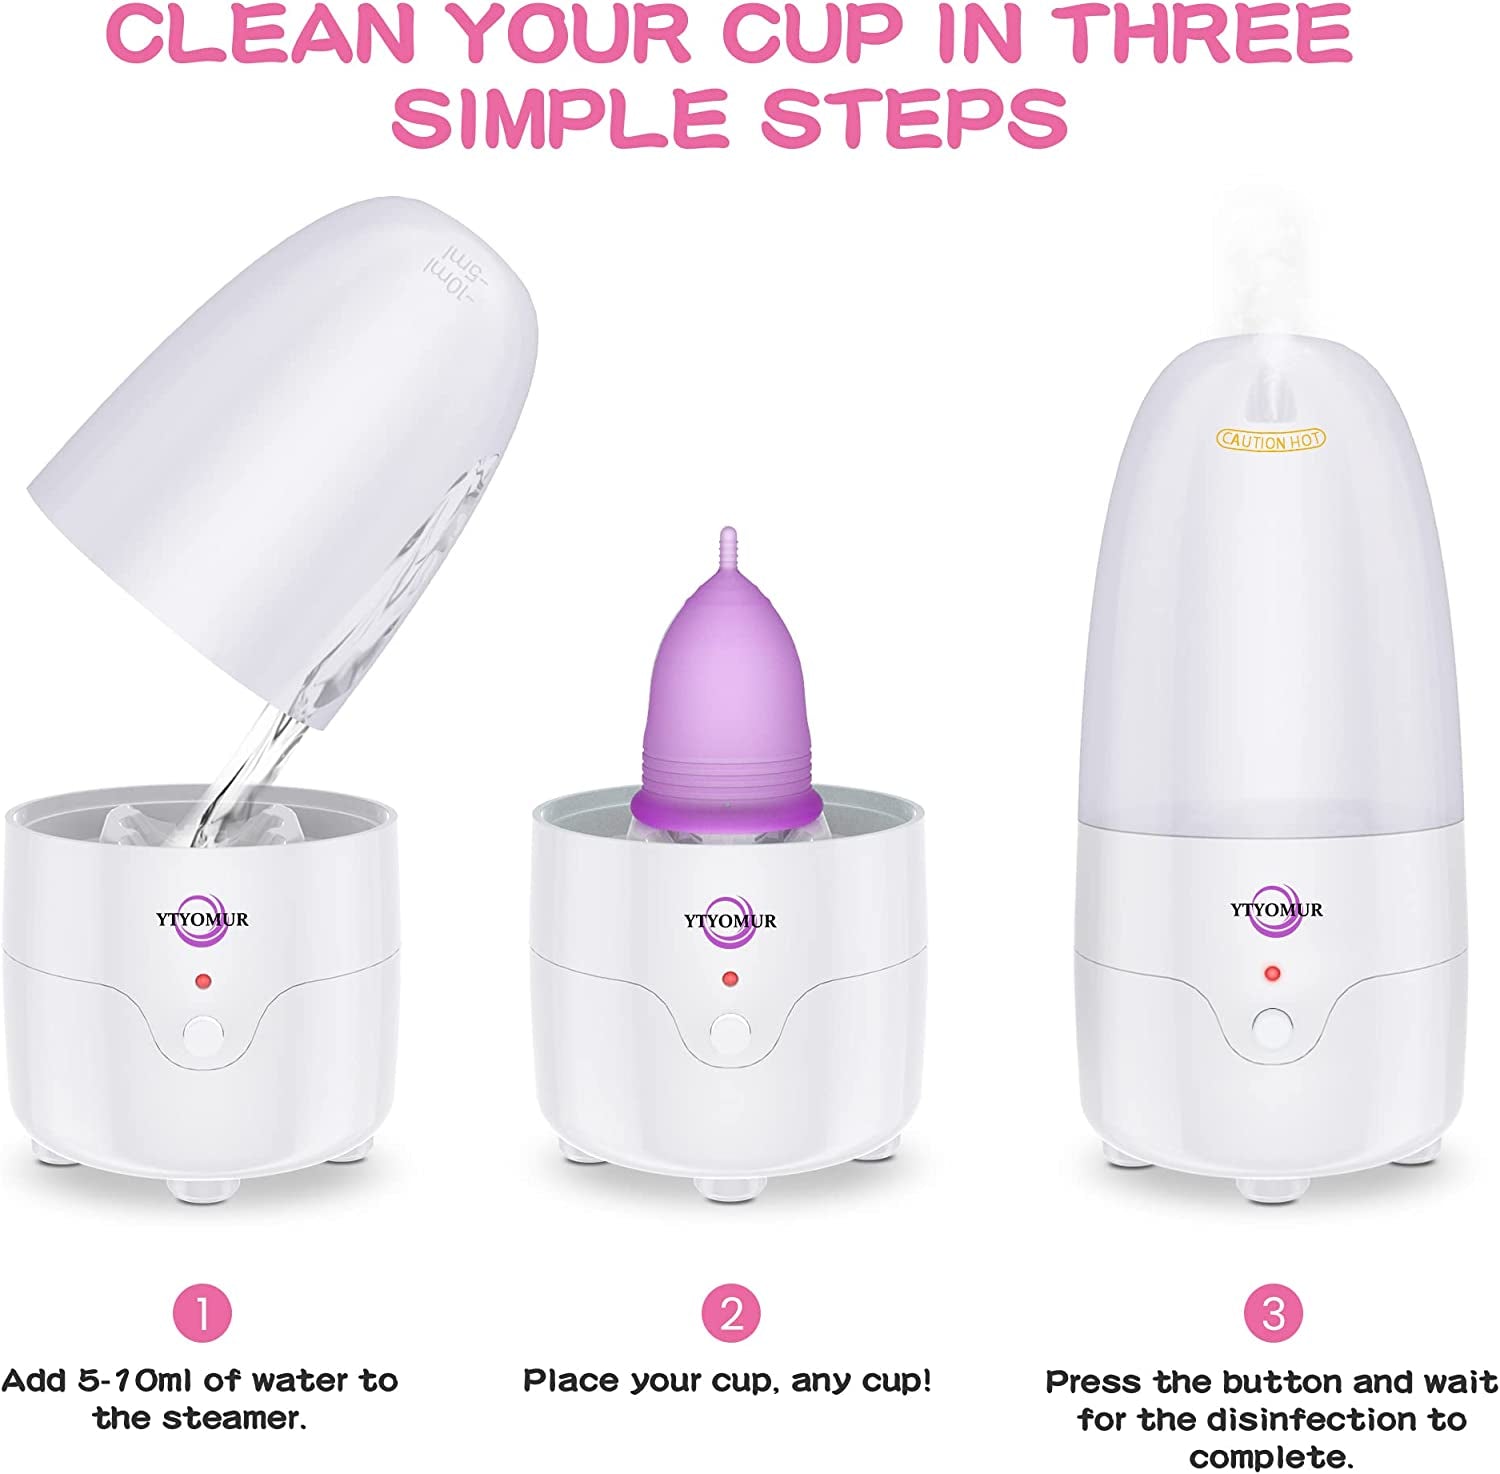 YTYOMUR Menstrual Cup Steamer Sterilizer with 2 Reusable Menstrual Cups, Period Cups Cleaner Wash Kit